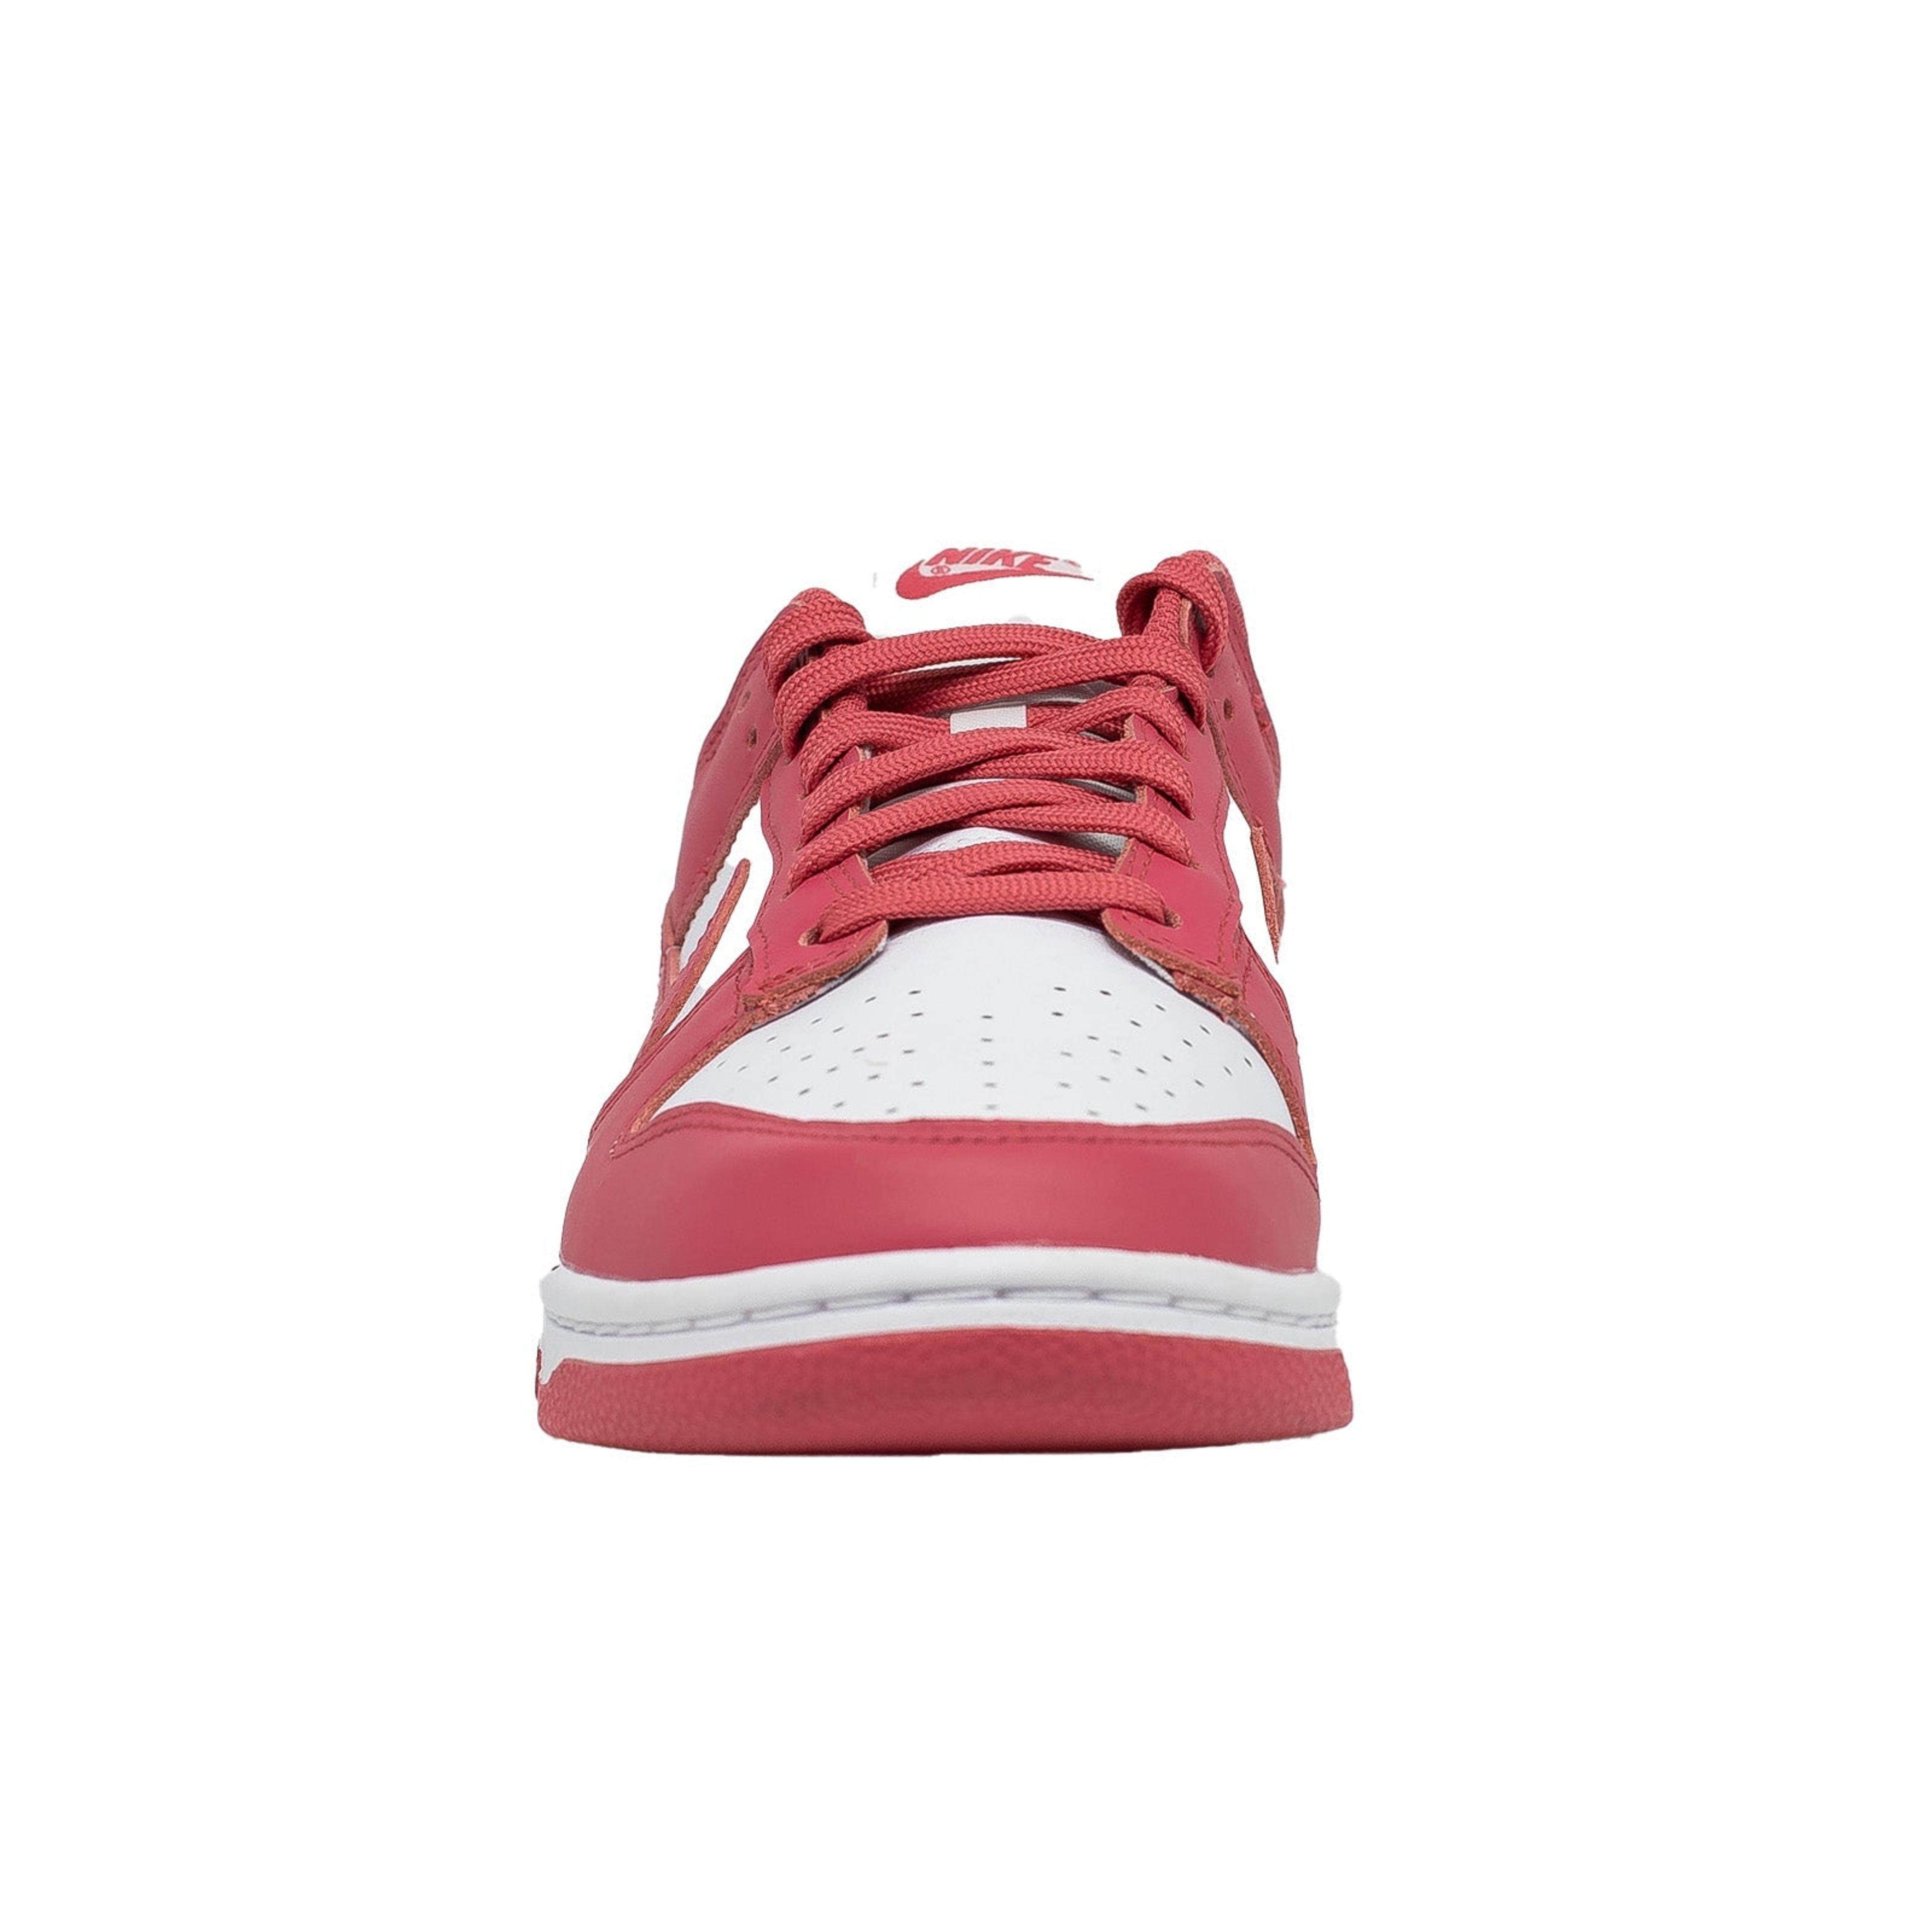 Alternate View 2 of Women's Nike Dunk Low, Archeo Pink